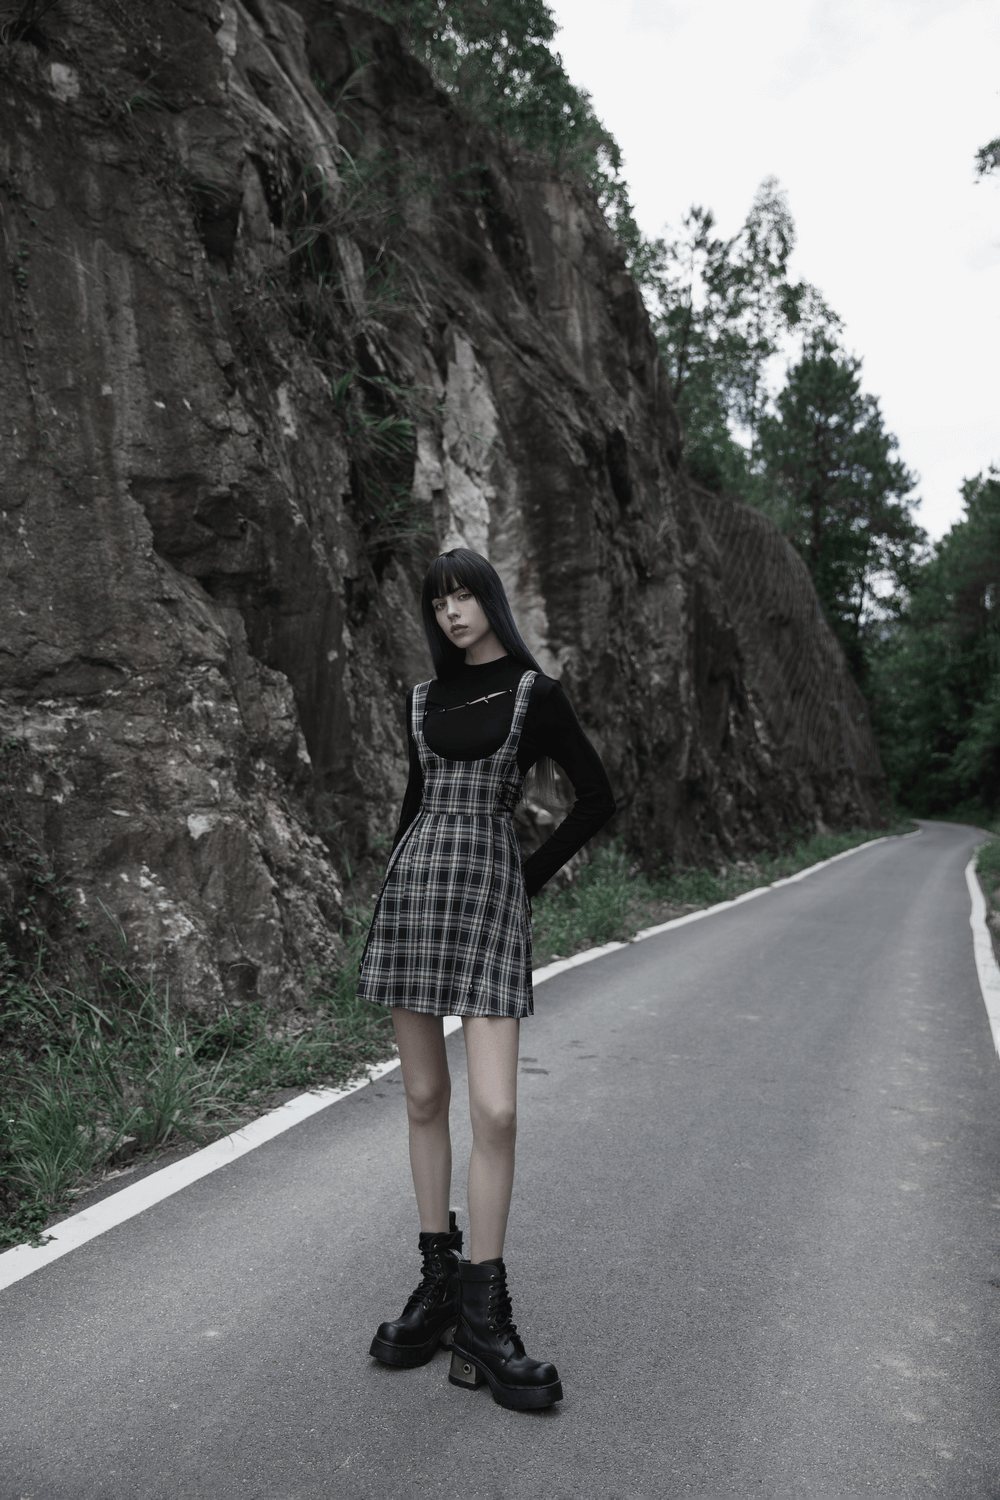 Chic Plaid Pleated Mini Dress with Strap Detail